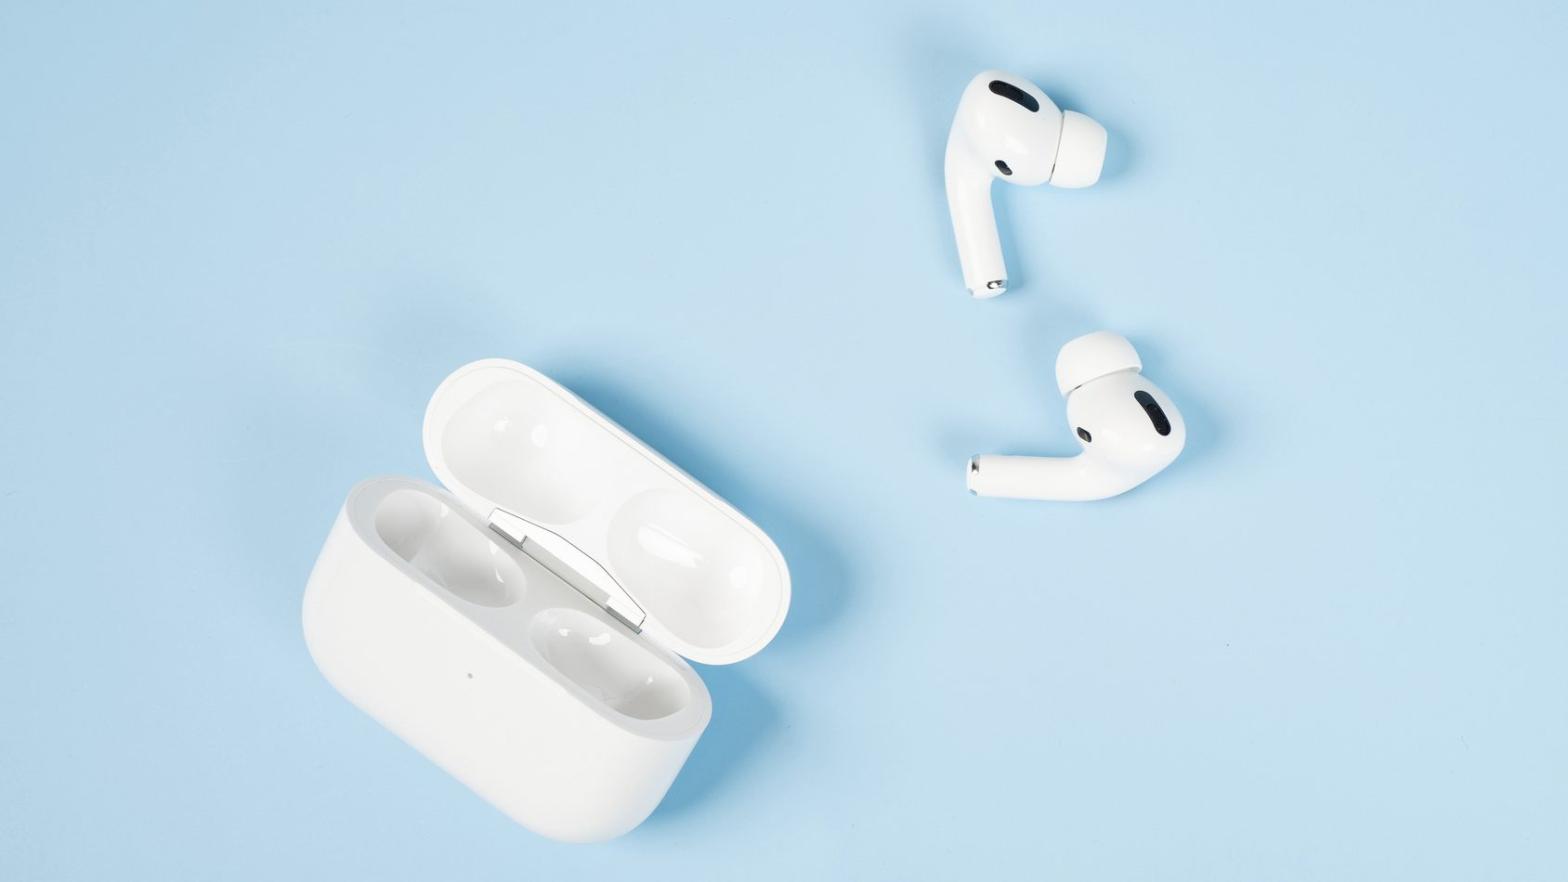 The Best Deals for Apple AirPods, Including the Pro and Max